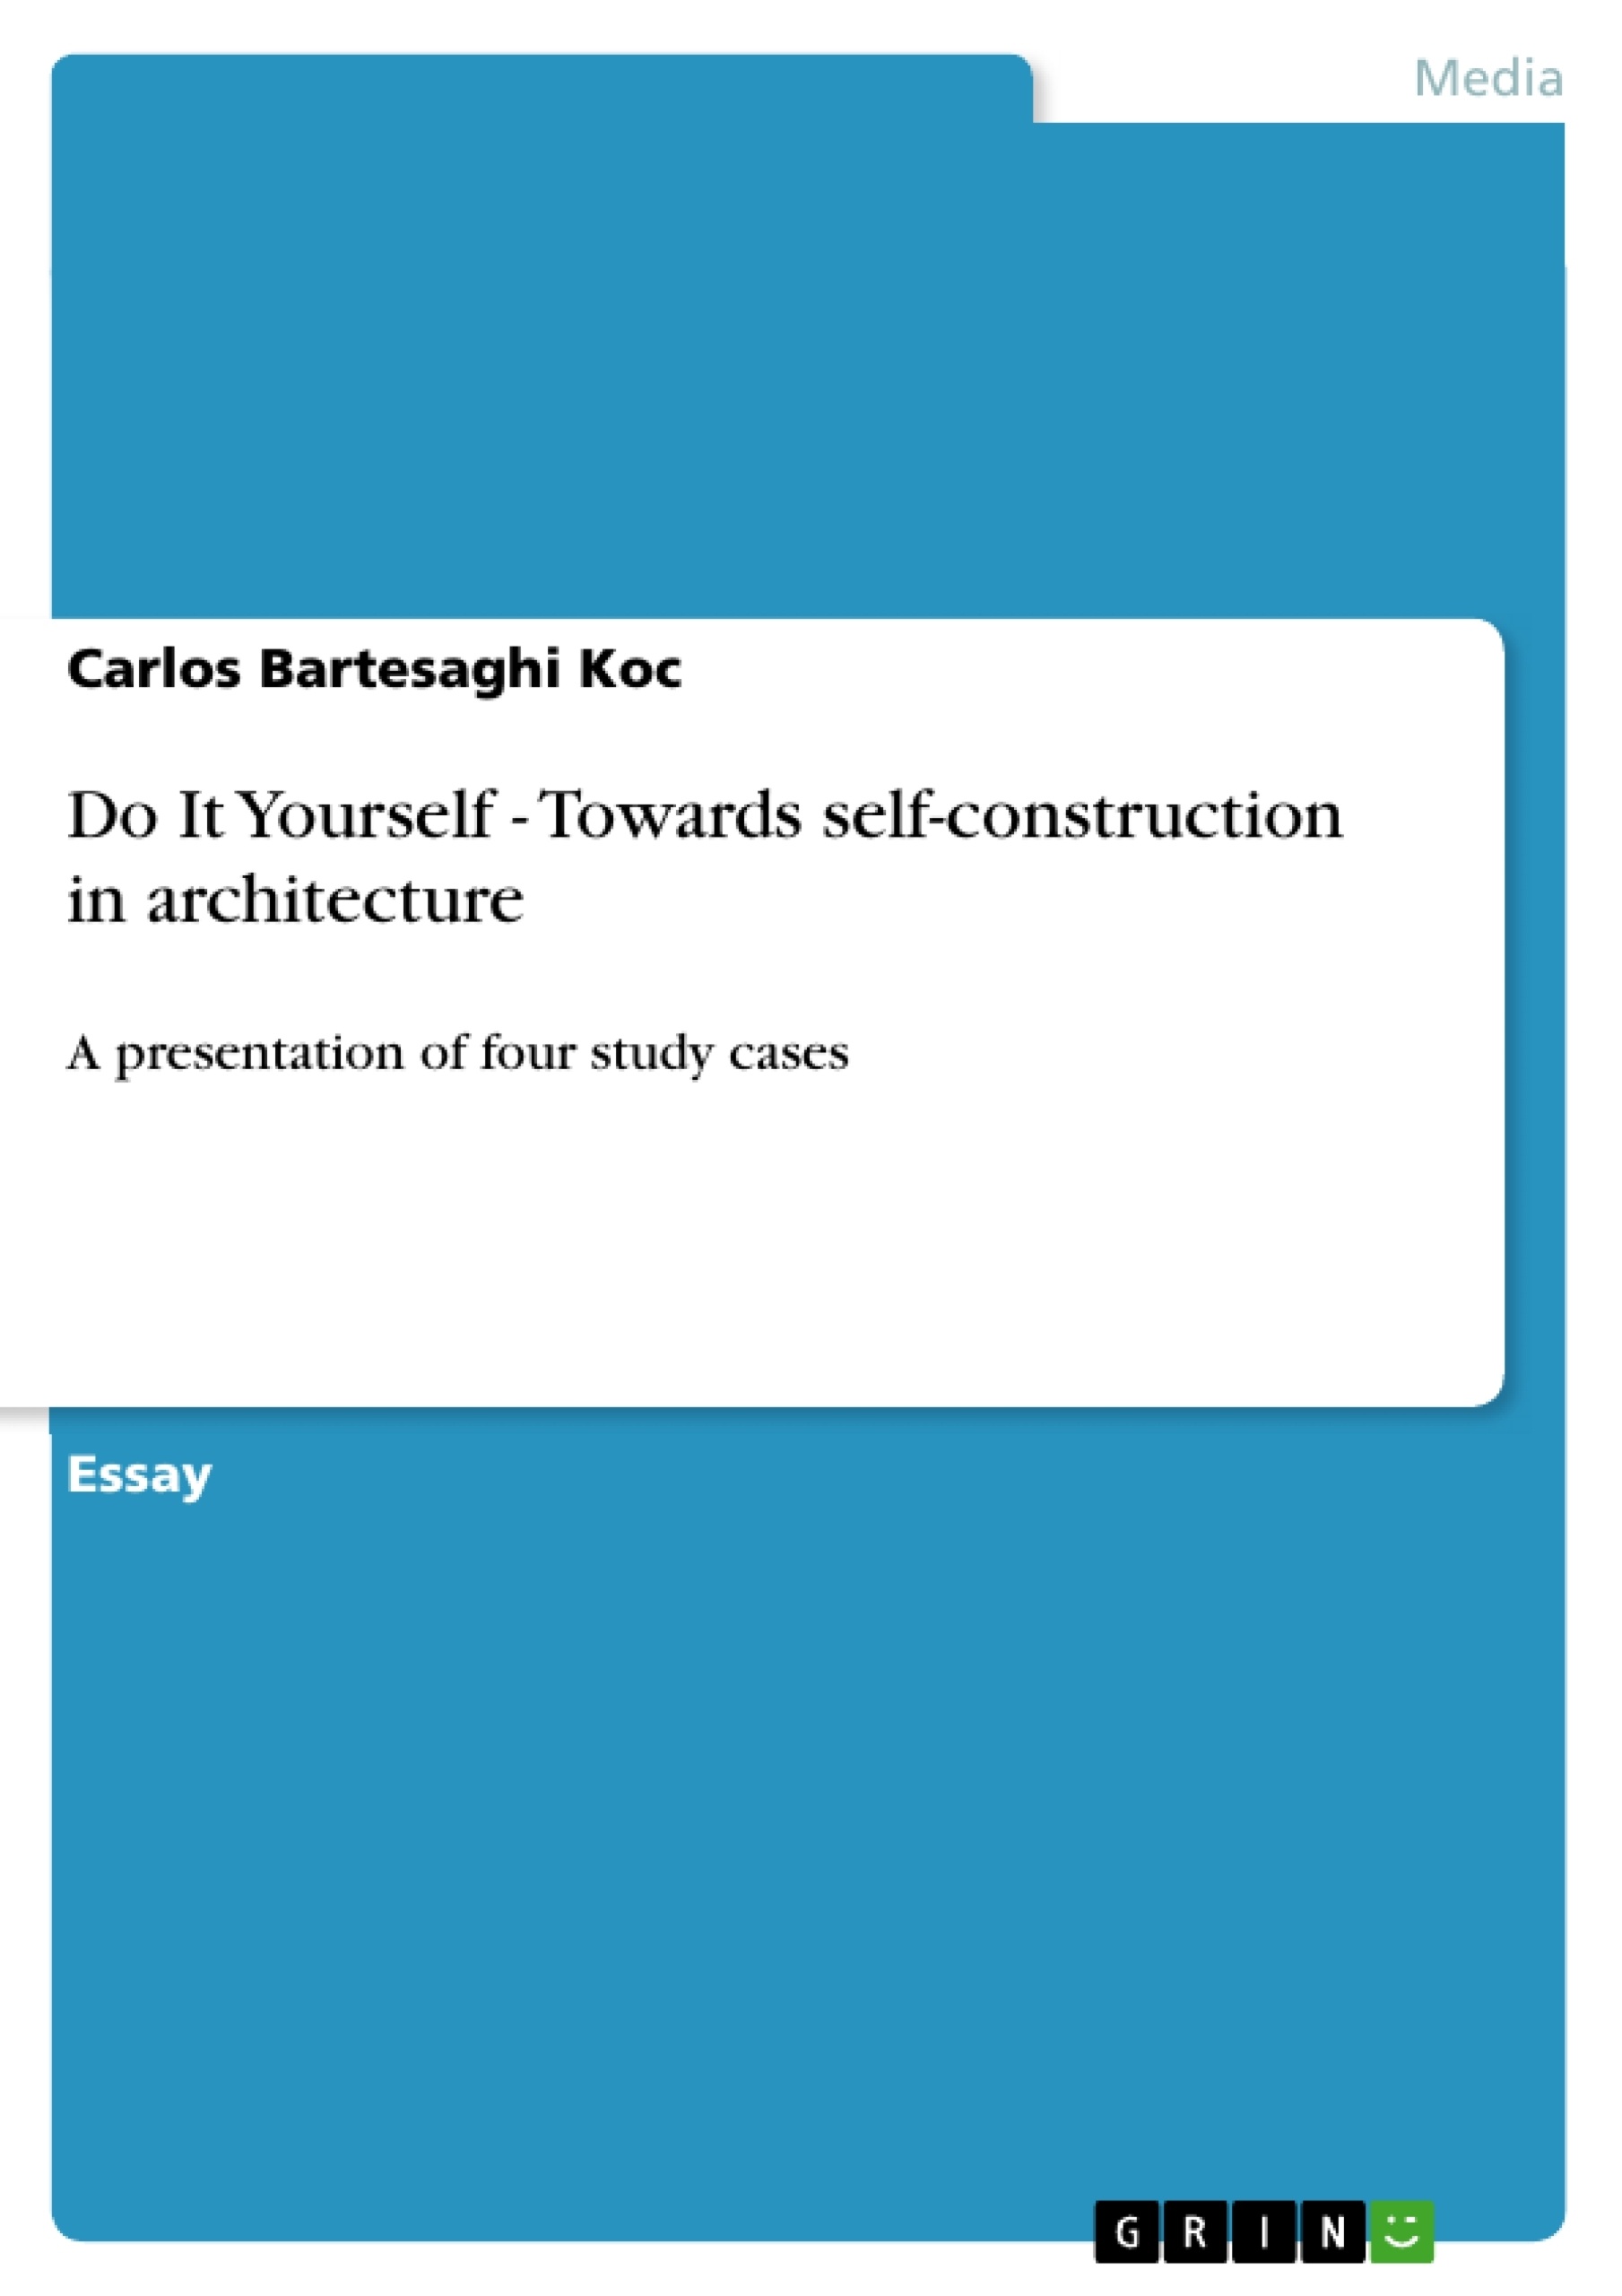 Título: Do It Yourself - Towards self-construction in architecture